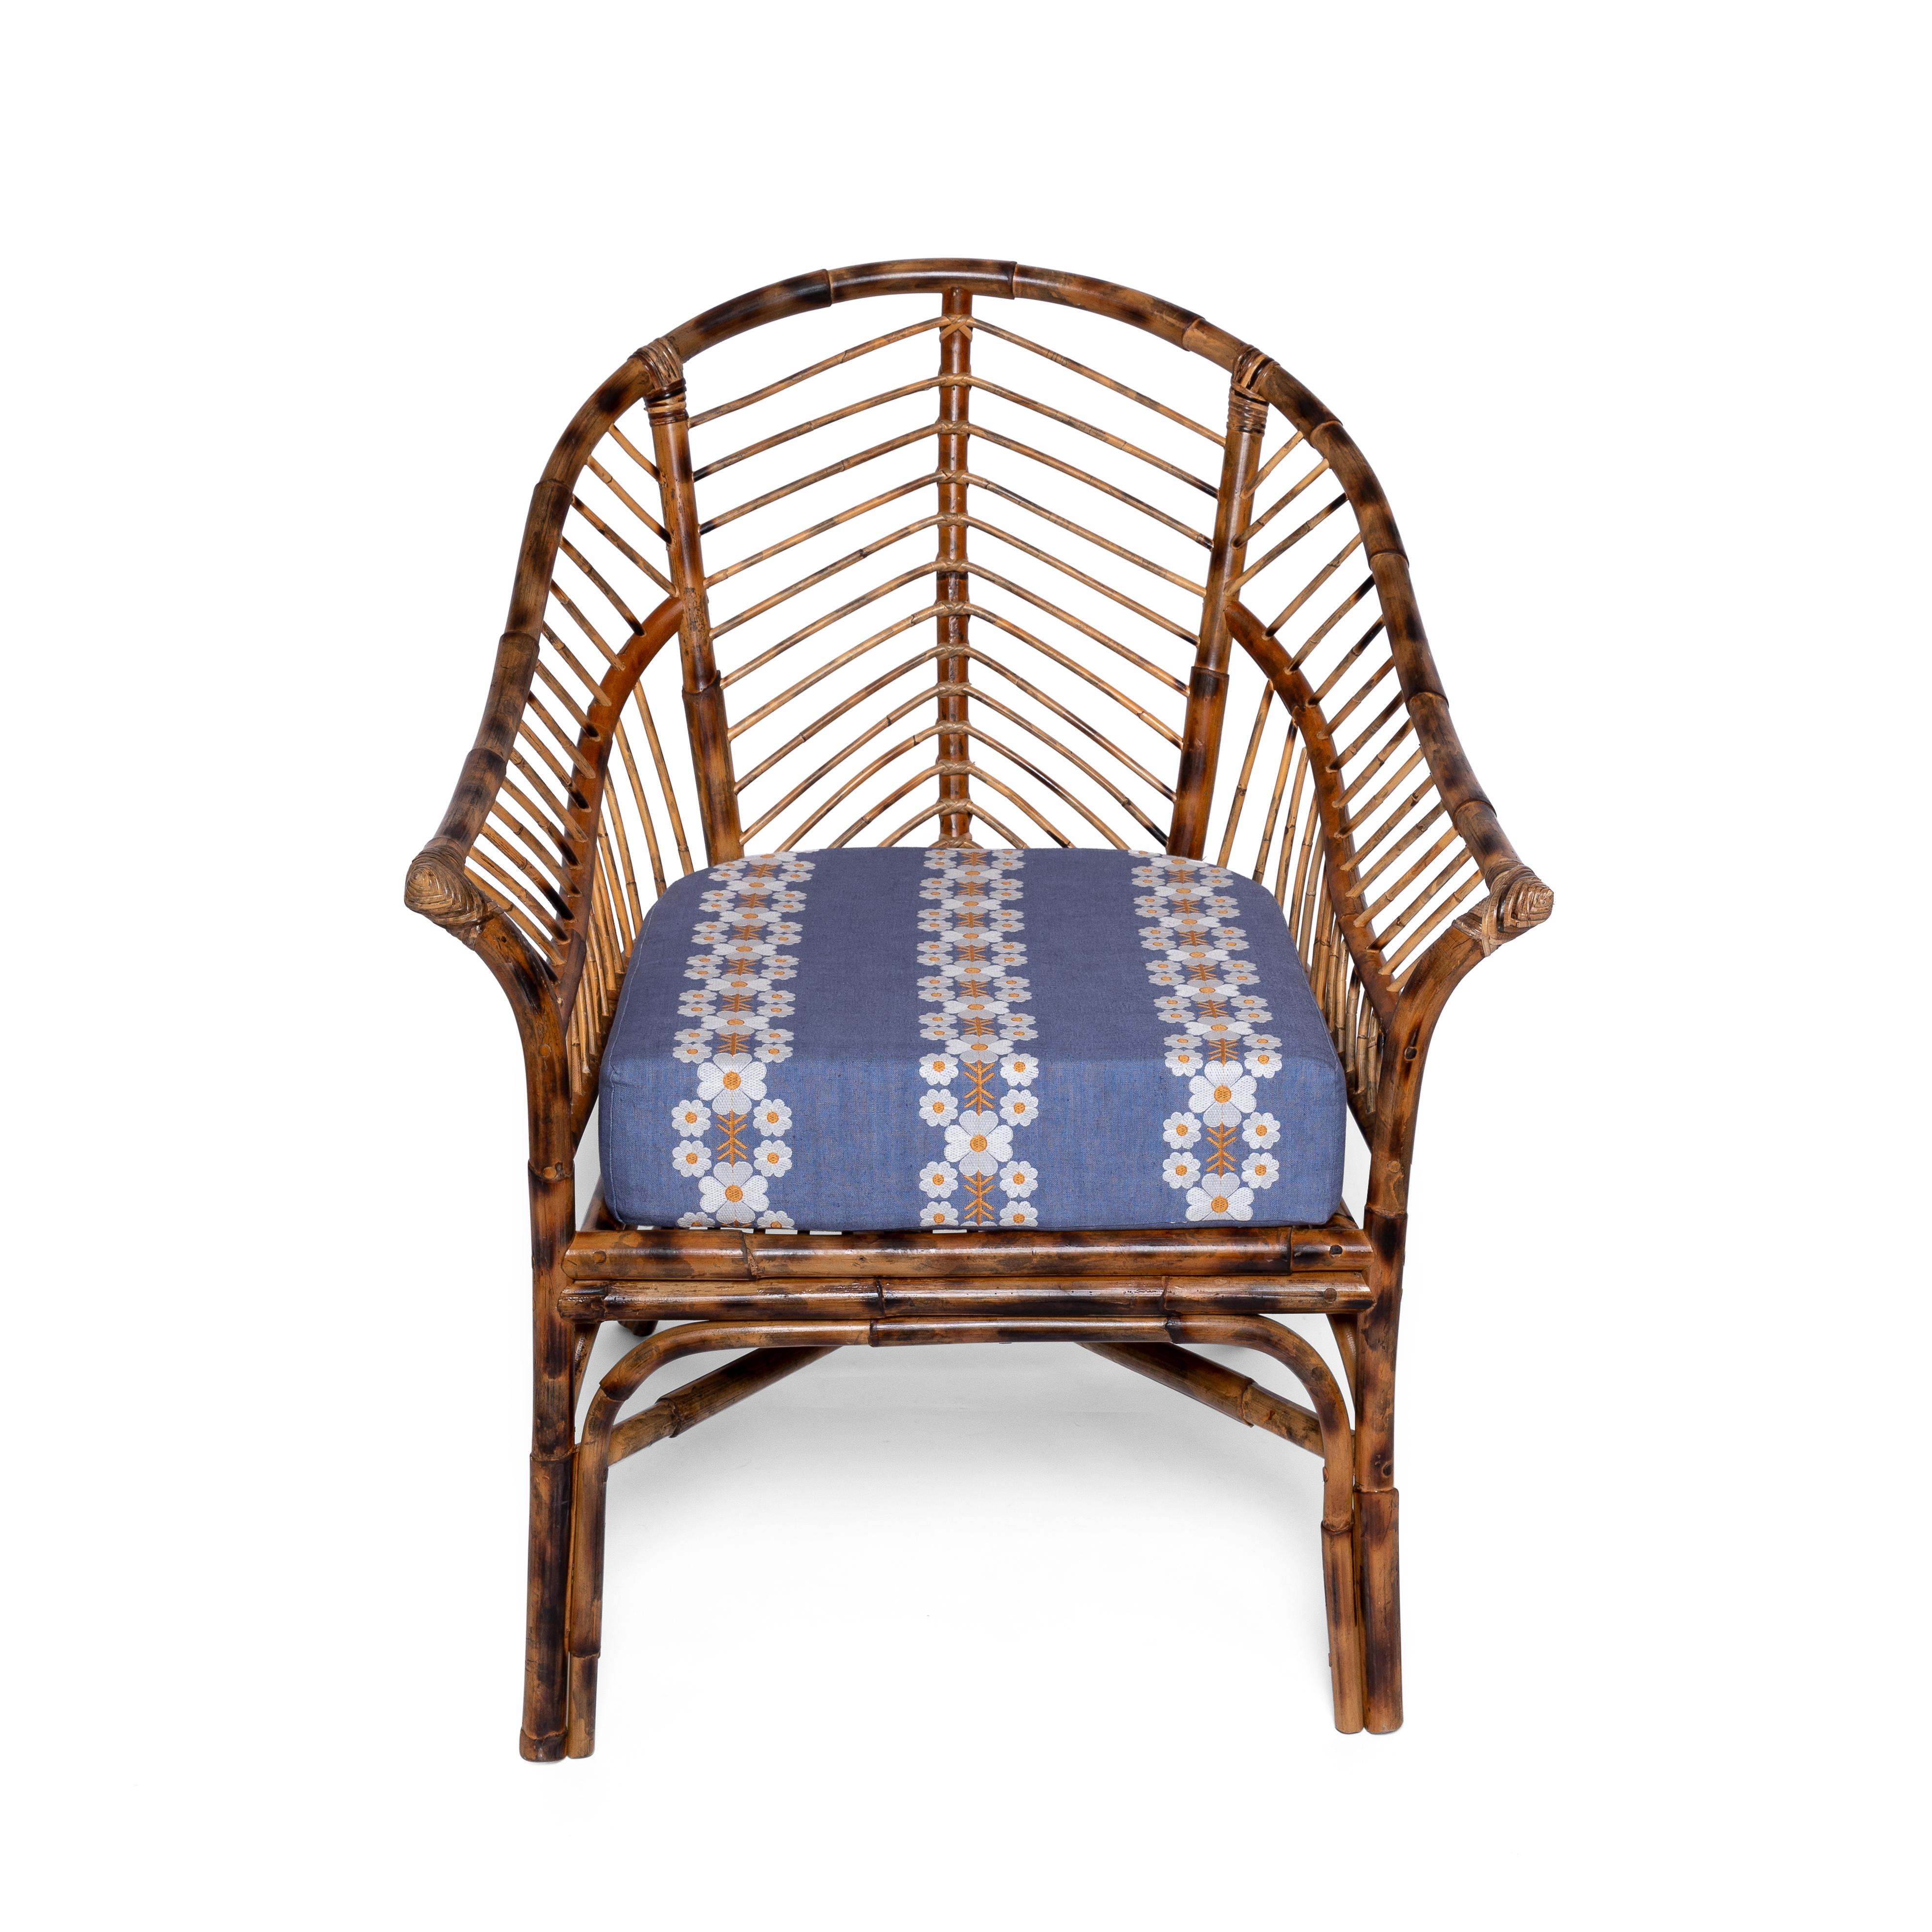 Contemporary Bamboo Chair in Natural Rattan, blue cushion, Modern by Sharland England